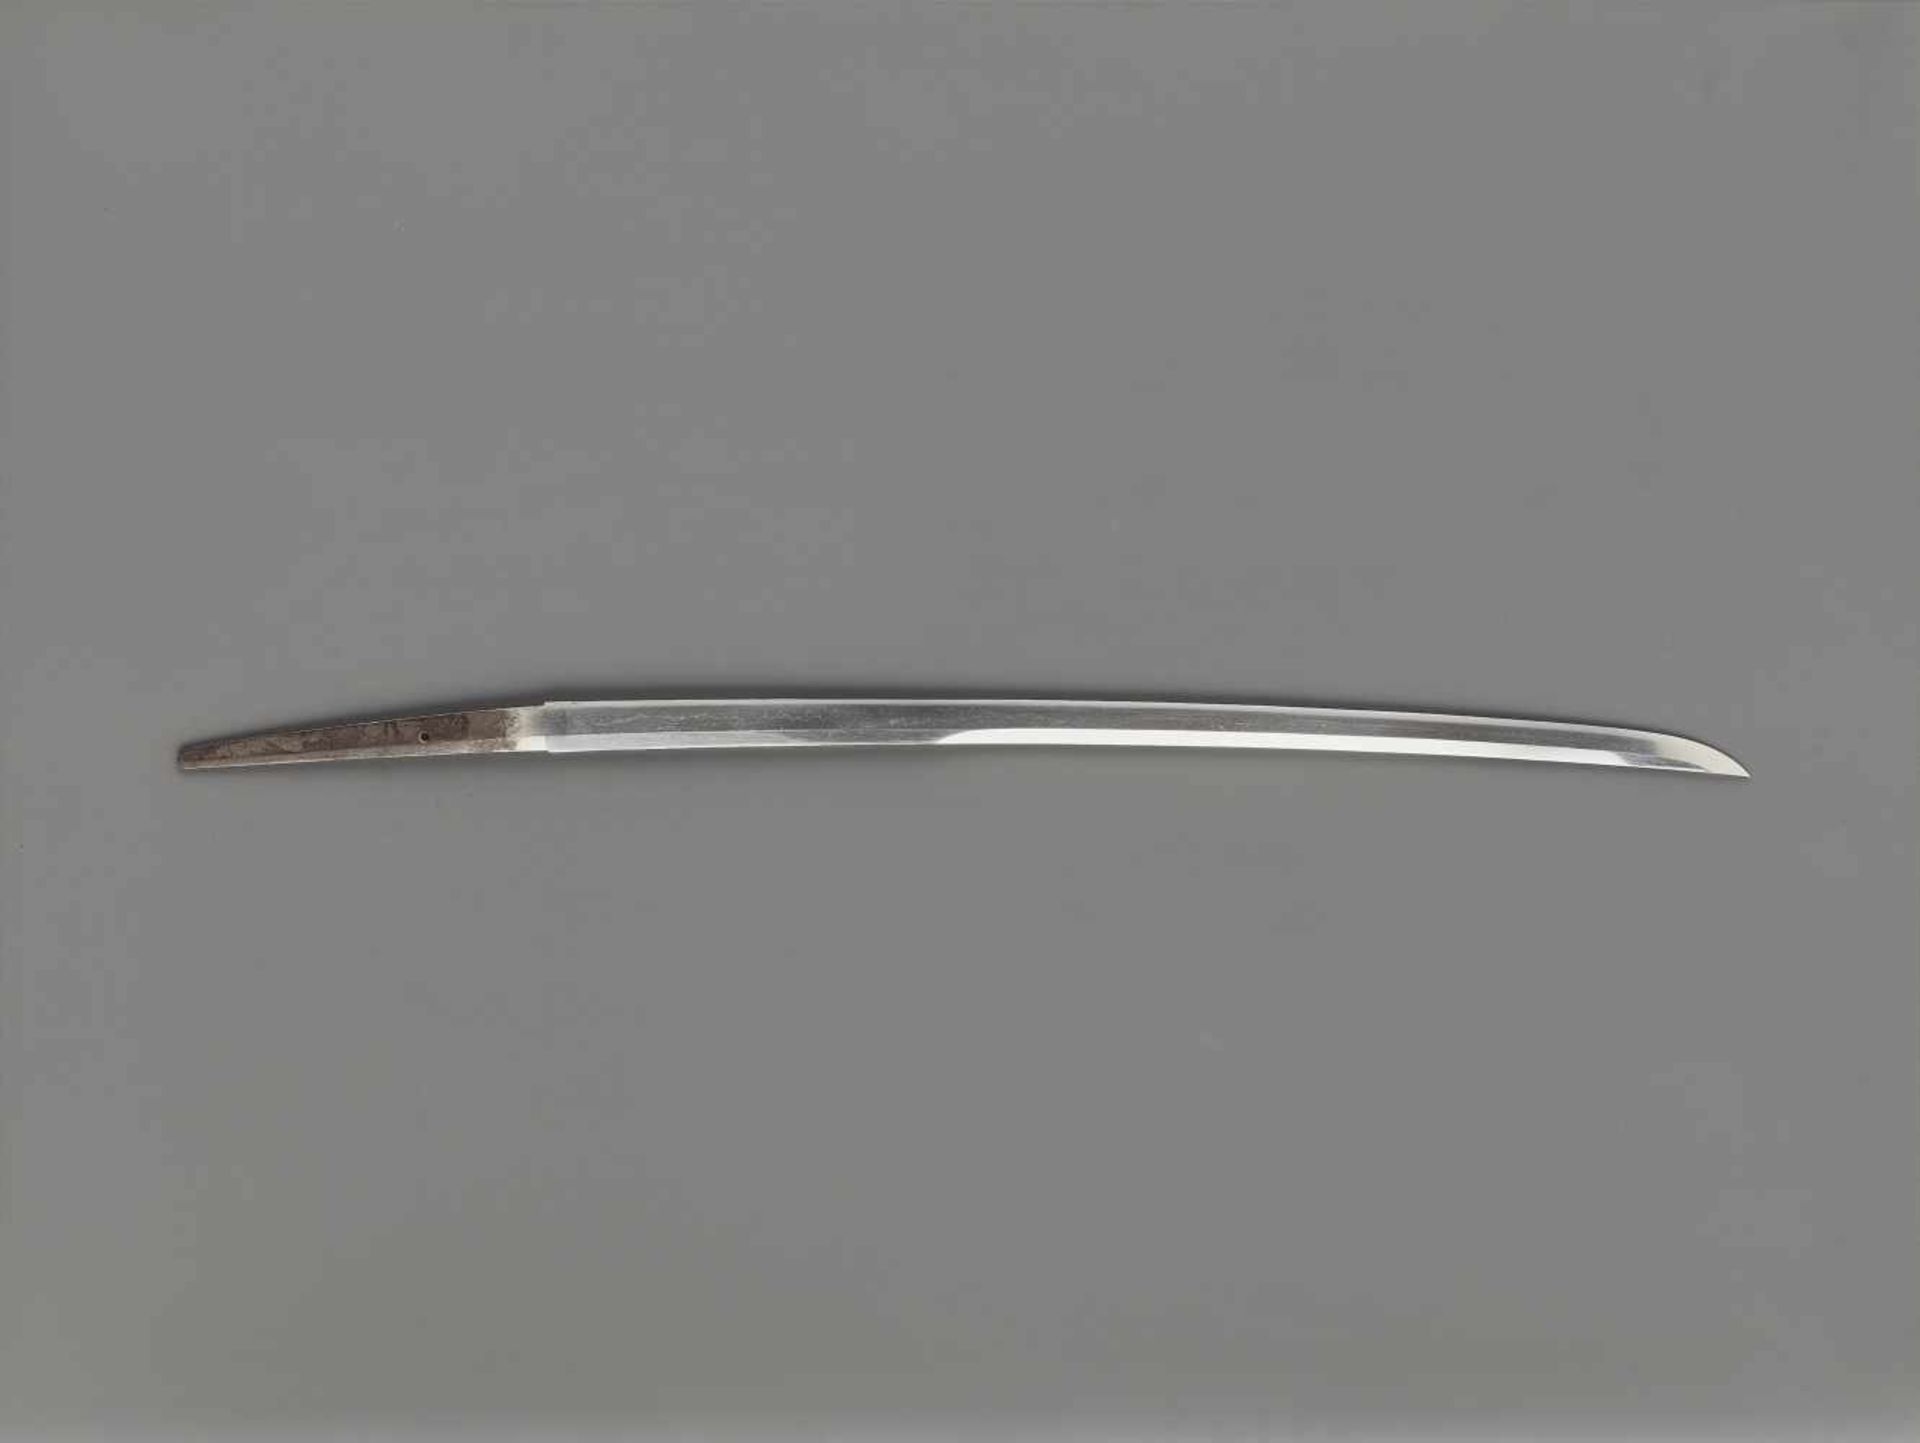 AN EXCELLENT KATANA IN KOSHIRAE Japan, c. 17th century, mid-Edo period (1615-1868)The blade:A - Image 2 of 9